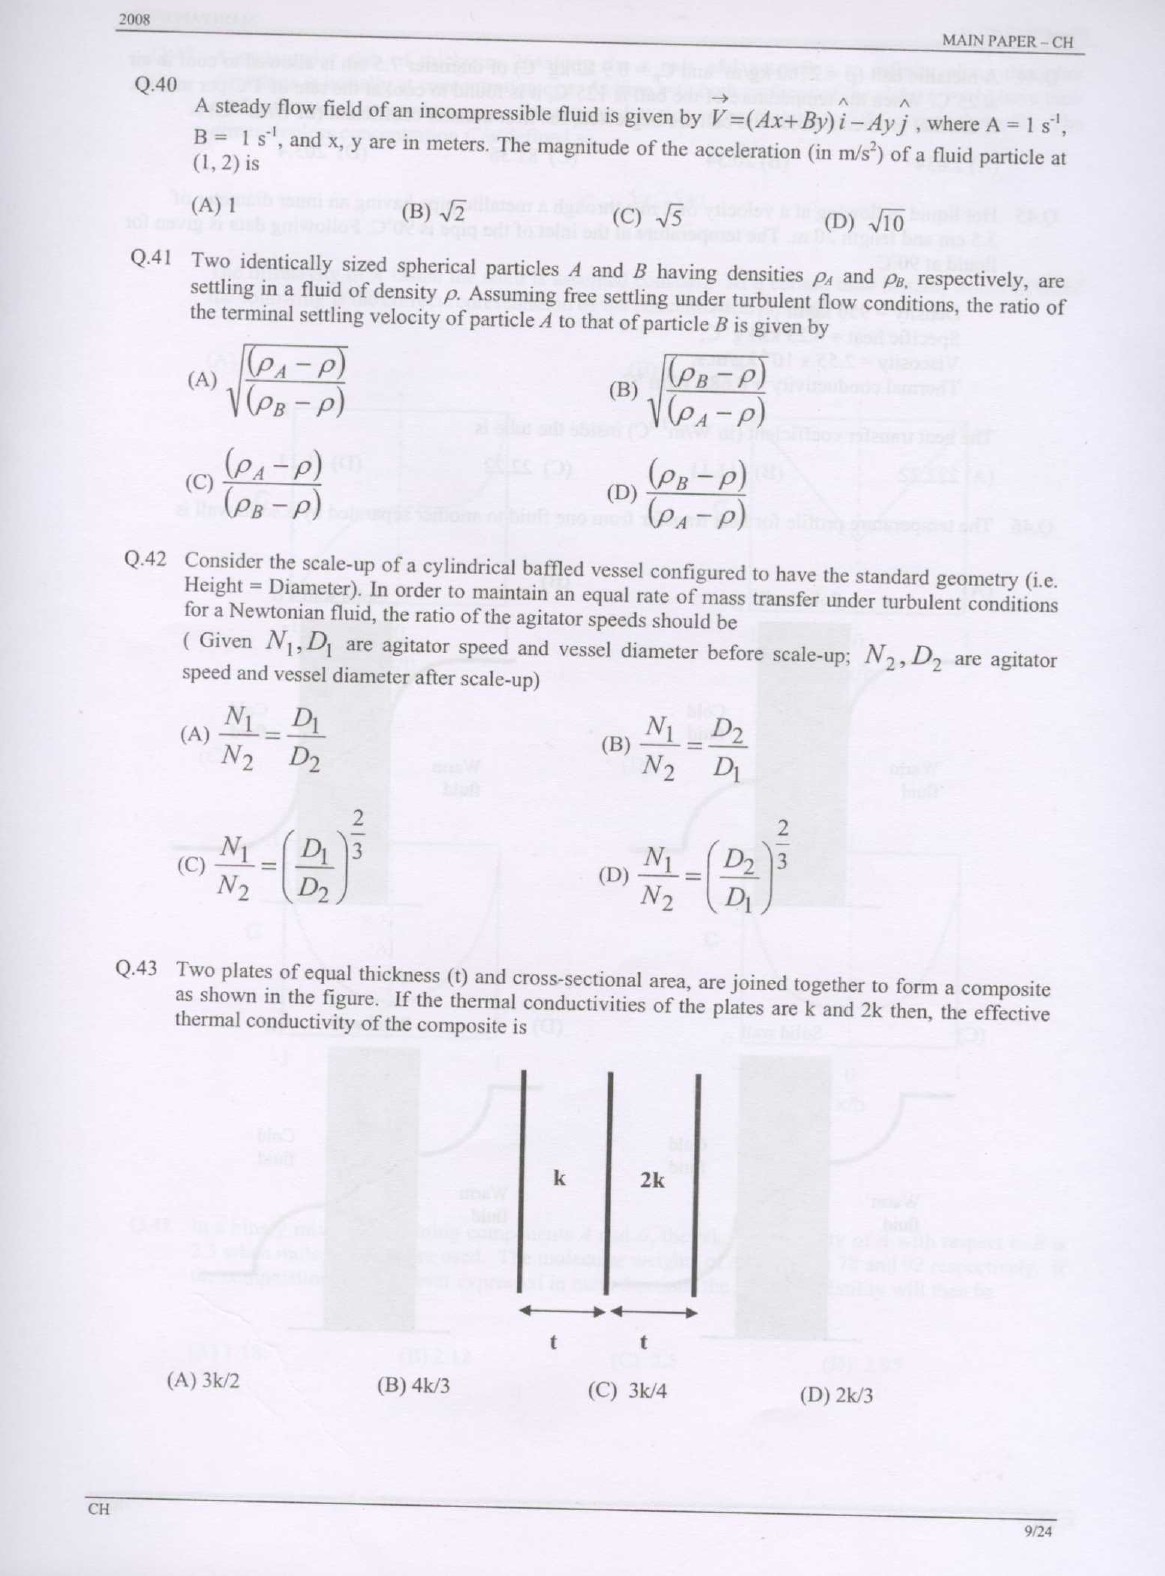 GATE Exam Question Paper 2008 Chemical Engineering 9